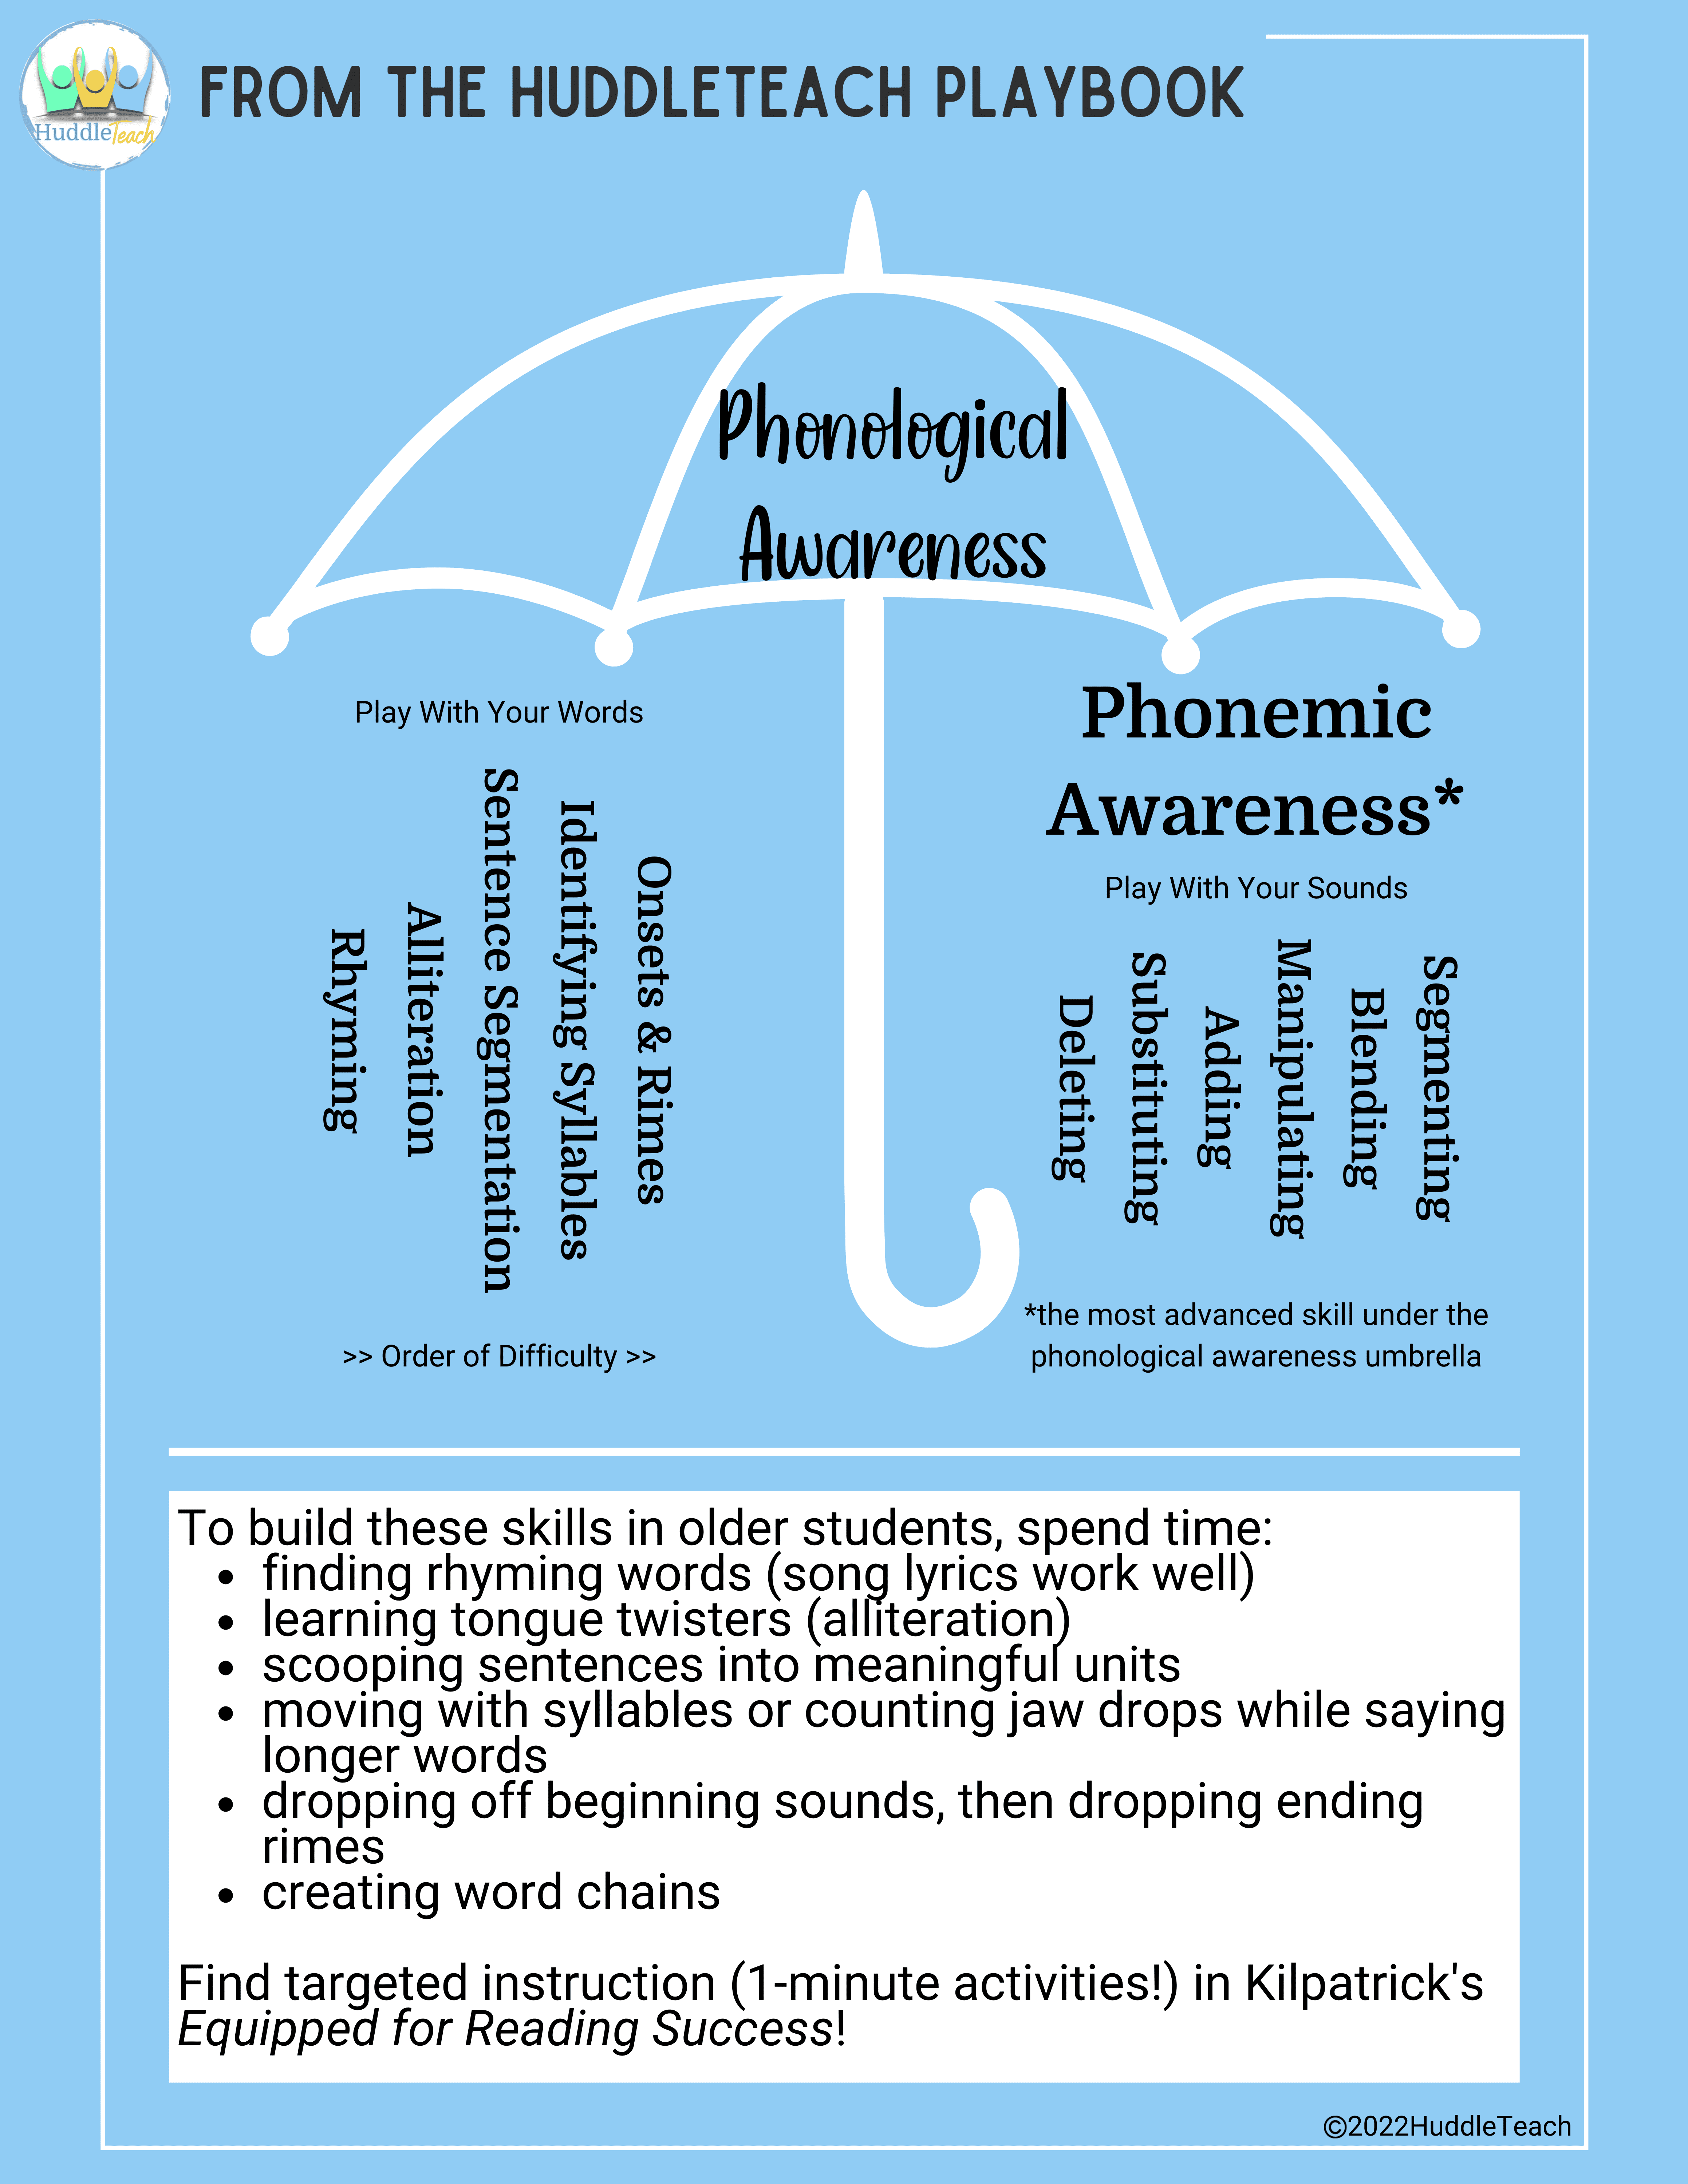 large white umbrella on blue background showing the components of phonological awareness and phonemic awareness for older students